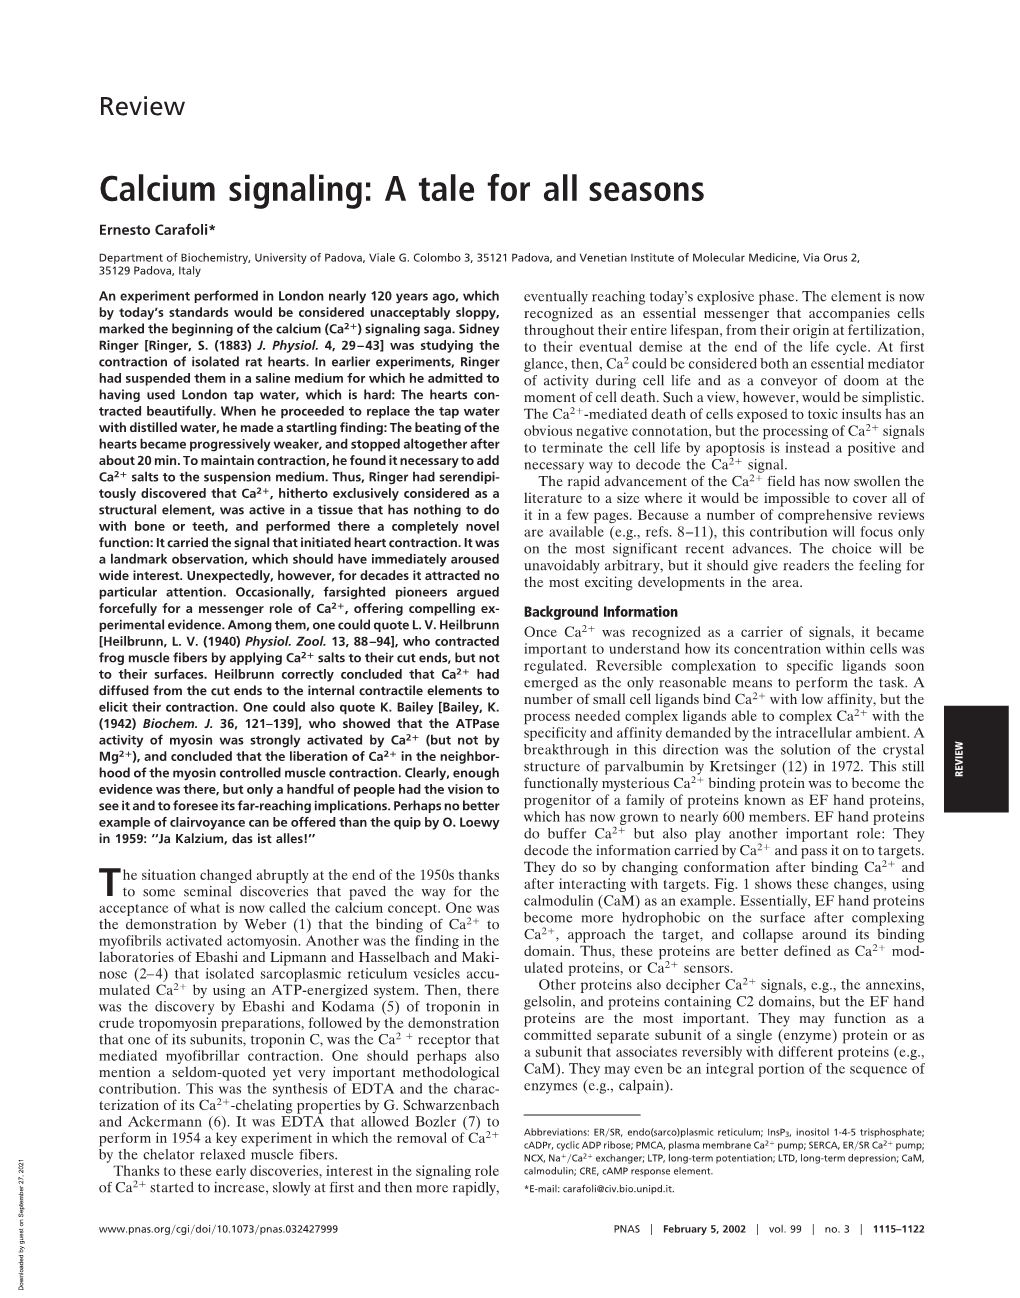 Calcium Signaling: a Tale for All Seasons